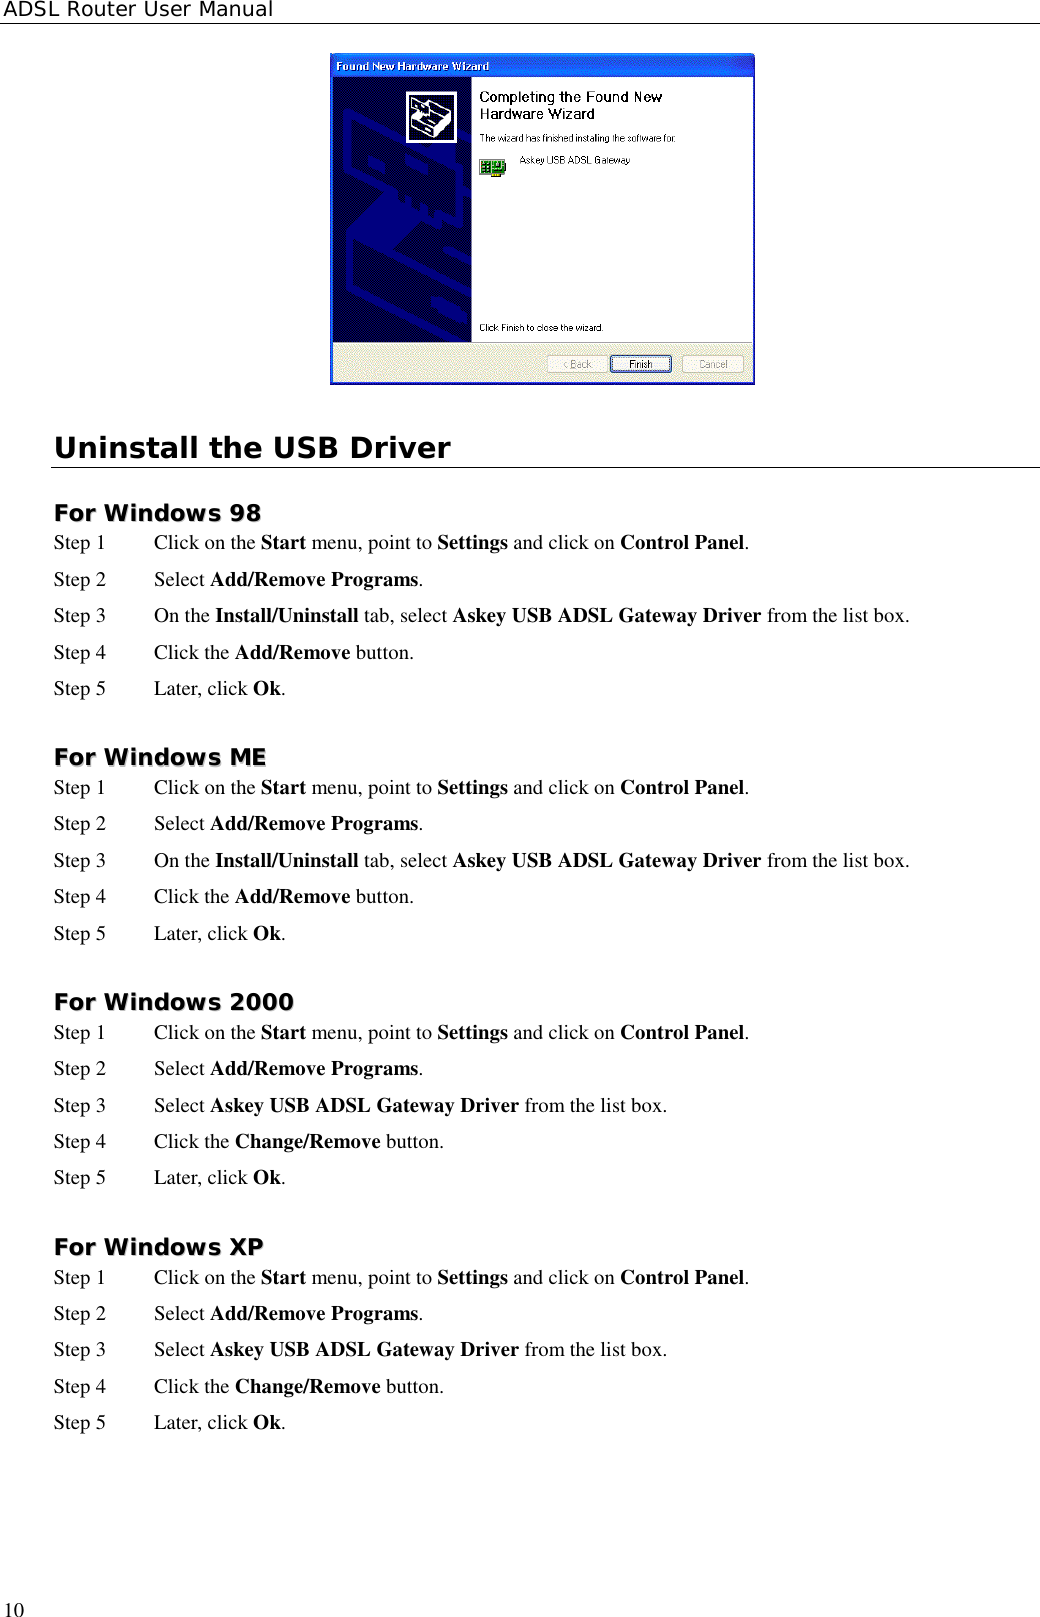 ADSL Router User Manual10Uninstall the USB DriverFFoorr  WWiinnddoowwss  9988Step 1  Click on the Start menu, point to Settings and click on Control Panel.Step 2 Select Add/Remove Programs.Step 3 On the Install/Uninstall tab, select Askey USB ADSL Gateway Driver from the list box.Step 4 Click the Add/Remove button.Step 5 Later, click Ok.FFoorr  WWiinnddoowwss  MMEEStep 1  Click on the Start menu, point to Settings and click on Control Panel.Step 2 Select Add/Remove Programs.Step 3 On the Install/Uninstall tab, select Askey USB ADSL Gateway Driver from the list box.Step 4 Click the Add/Remove button.Step 5 Later, click Ok.FFoorr  WWiinnddoowwss  22000000Step 1  Click on the Start menu, point to Settings and click on Control Panel.Step 2 Select Add/Remove Programs.Step 3 Select Askey USB ADSL Gateway Driver from the list box.Step 4 Click the Change/Remove button.Step 5 Later, click Ok.FFoorr  WWiinnddoowwss  XXPPStep 1  Click on the Start menu, point to Settings and click on Control Panel.Step 2 Select Add/Remove Programs.Step 3 Select Askey USB ADSL Gateway Driver from the list box.Step 4 Click the Change/Remove button.Step 5 Later, click Ok.